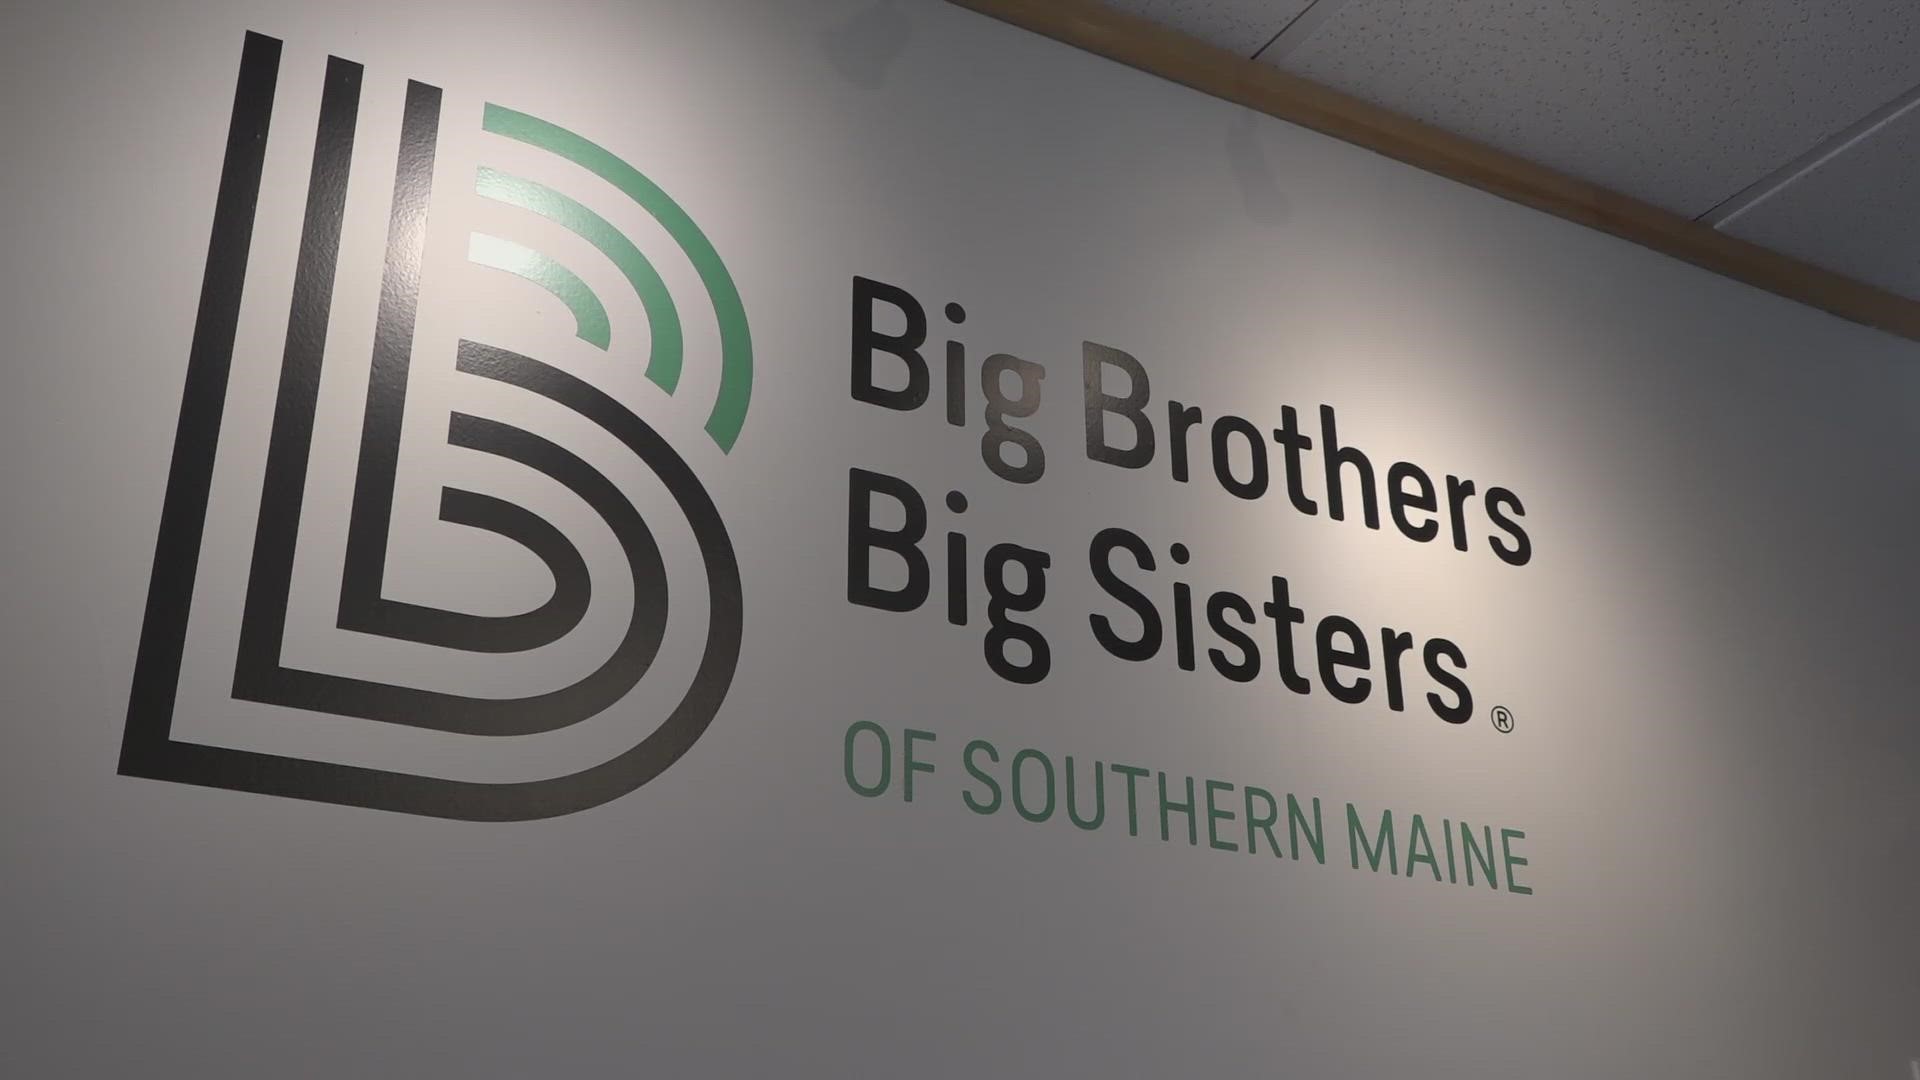 Big Brothers Big Sisters of Southern Maine is a mentorship program that helps kids find guidance from older role models called “bigs.”